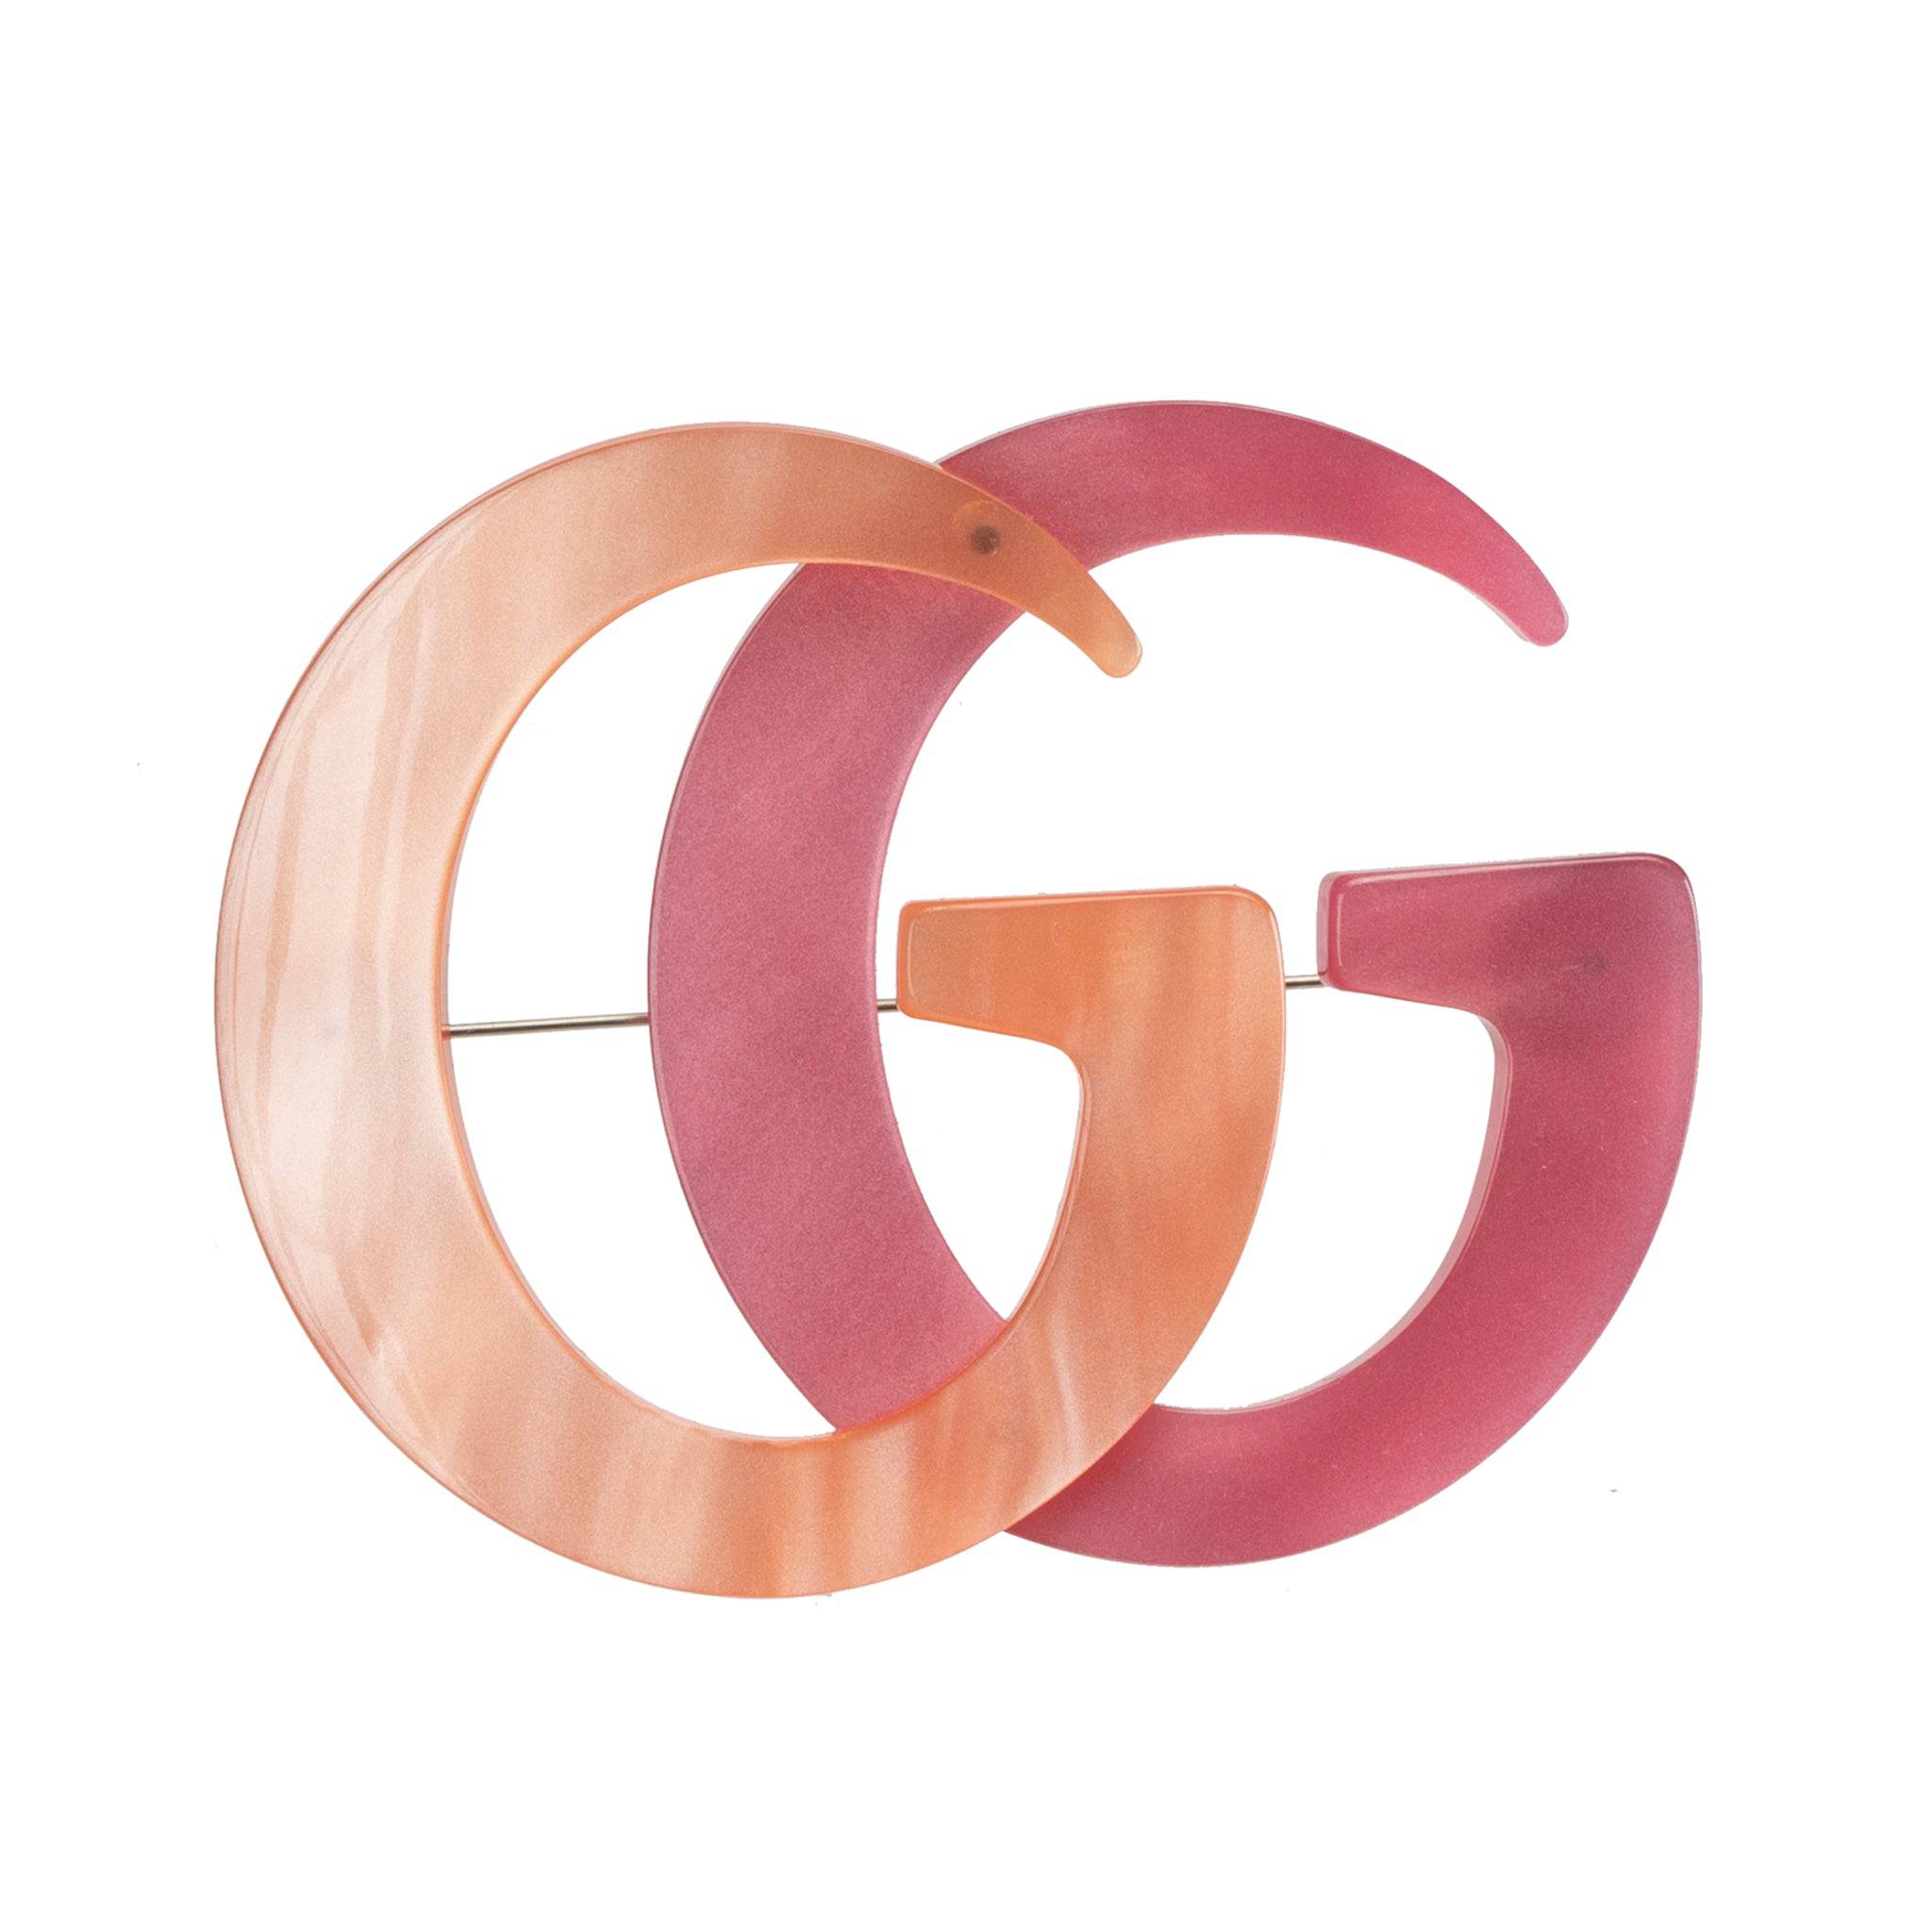 GUCCI RESIN BROOCH PINK & ORANGE - On Repeat